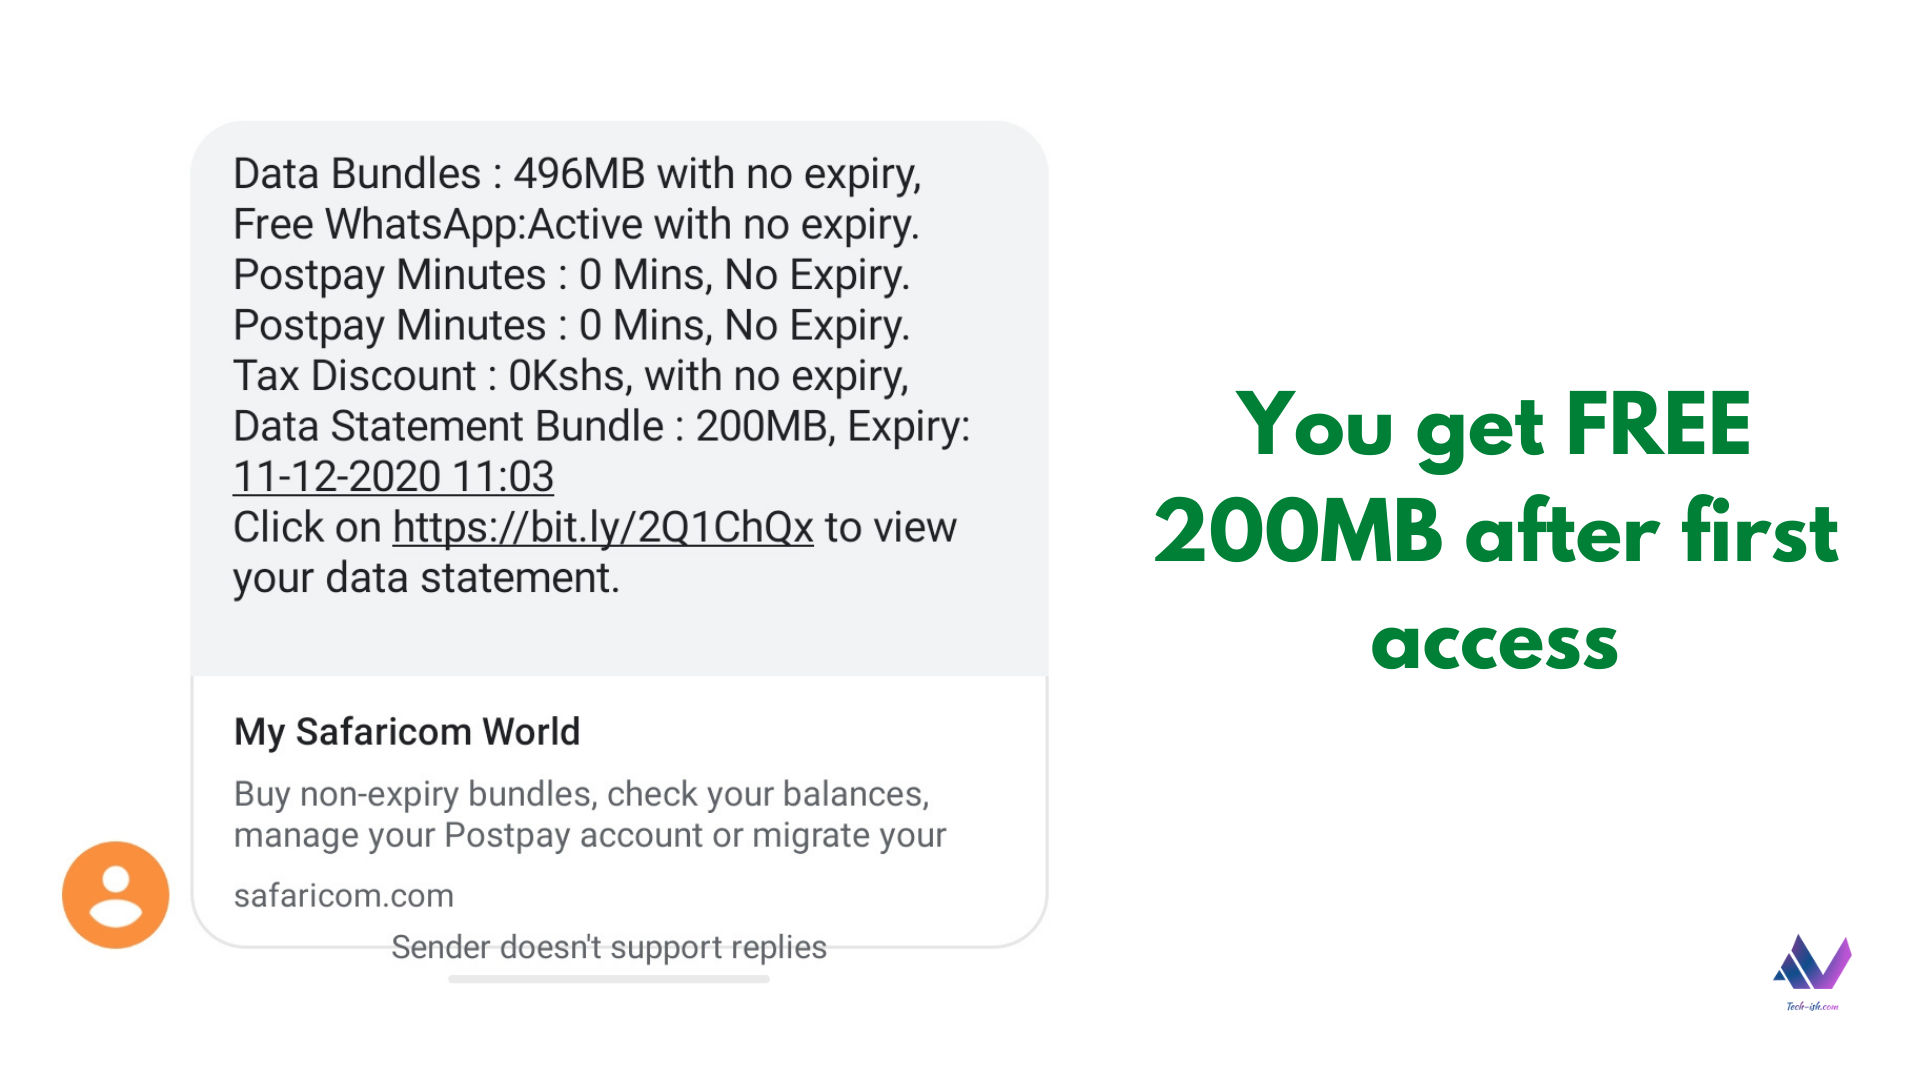 Free 200MB after accessing Safaricom Data Statement